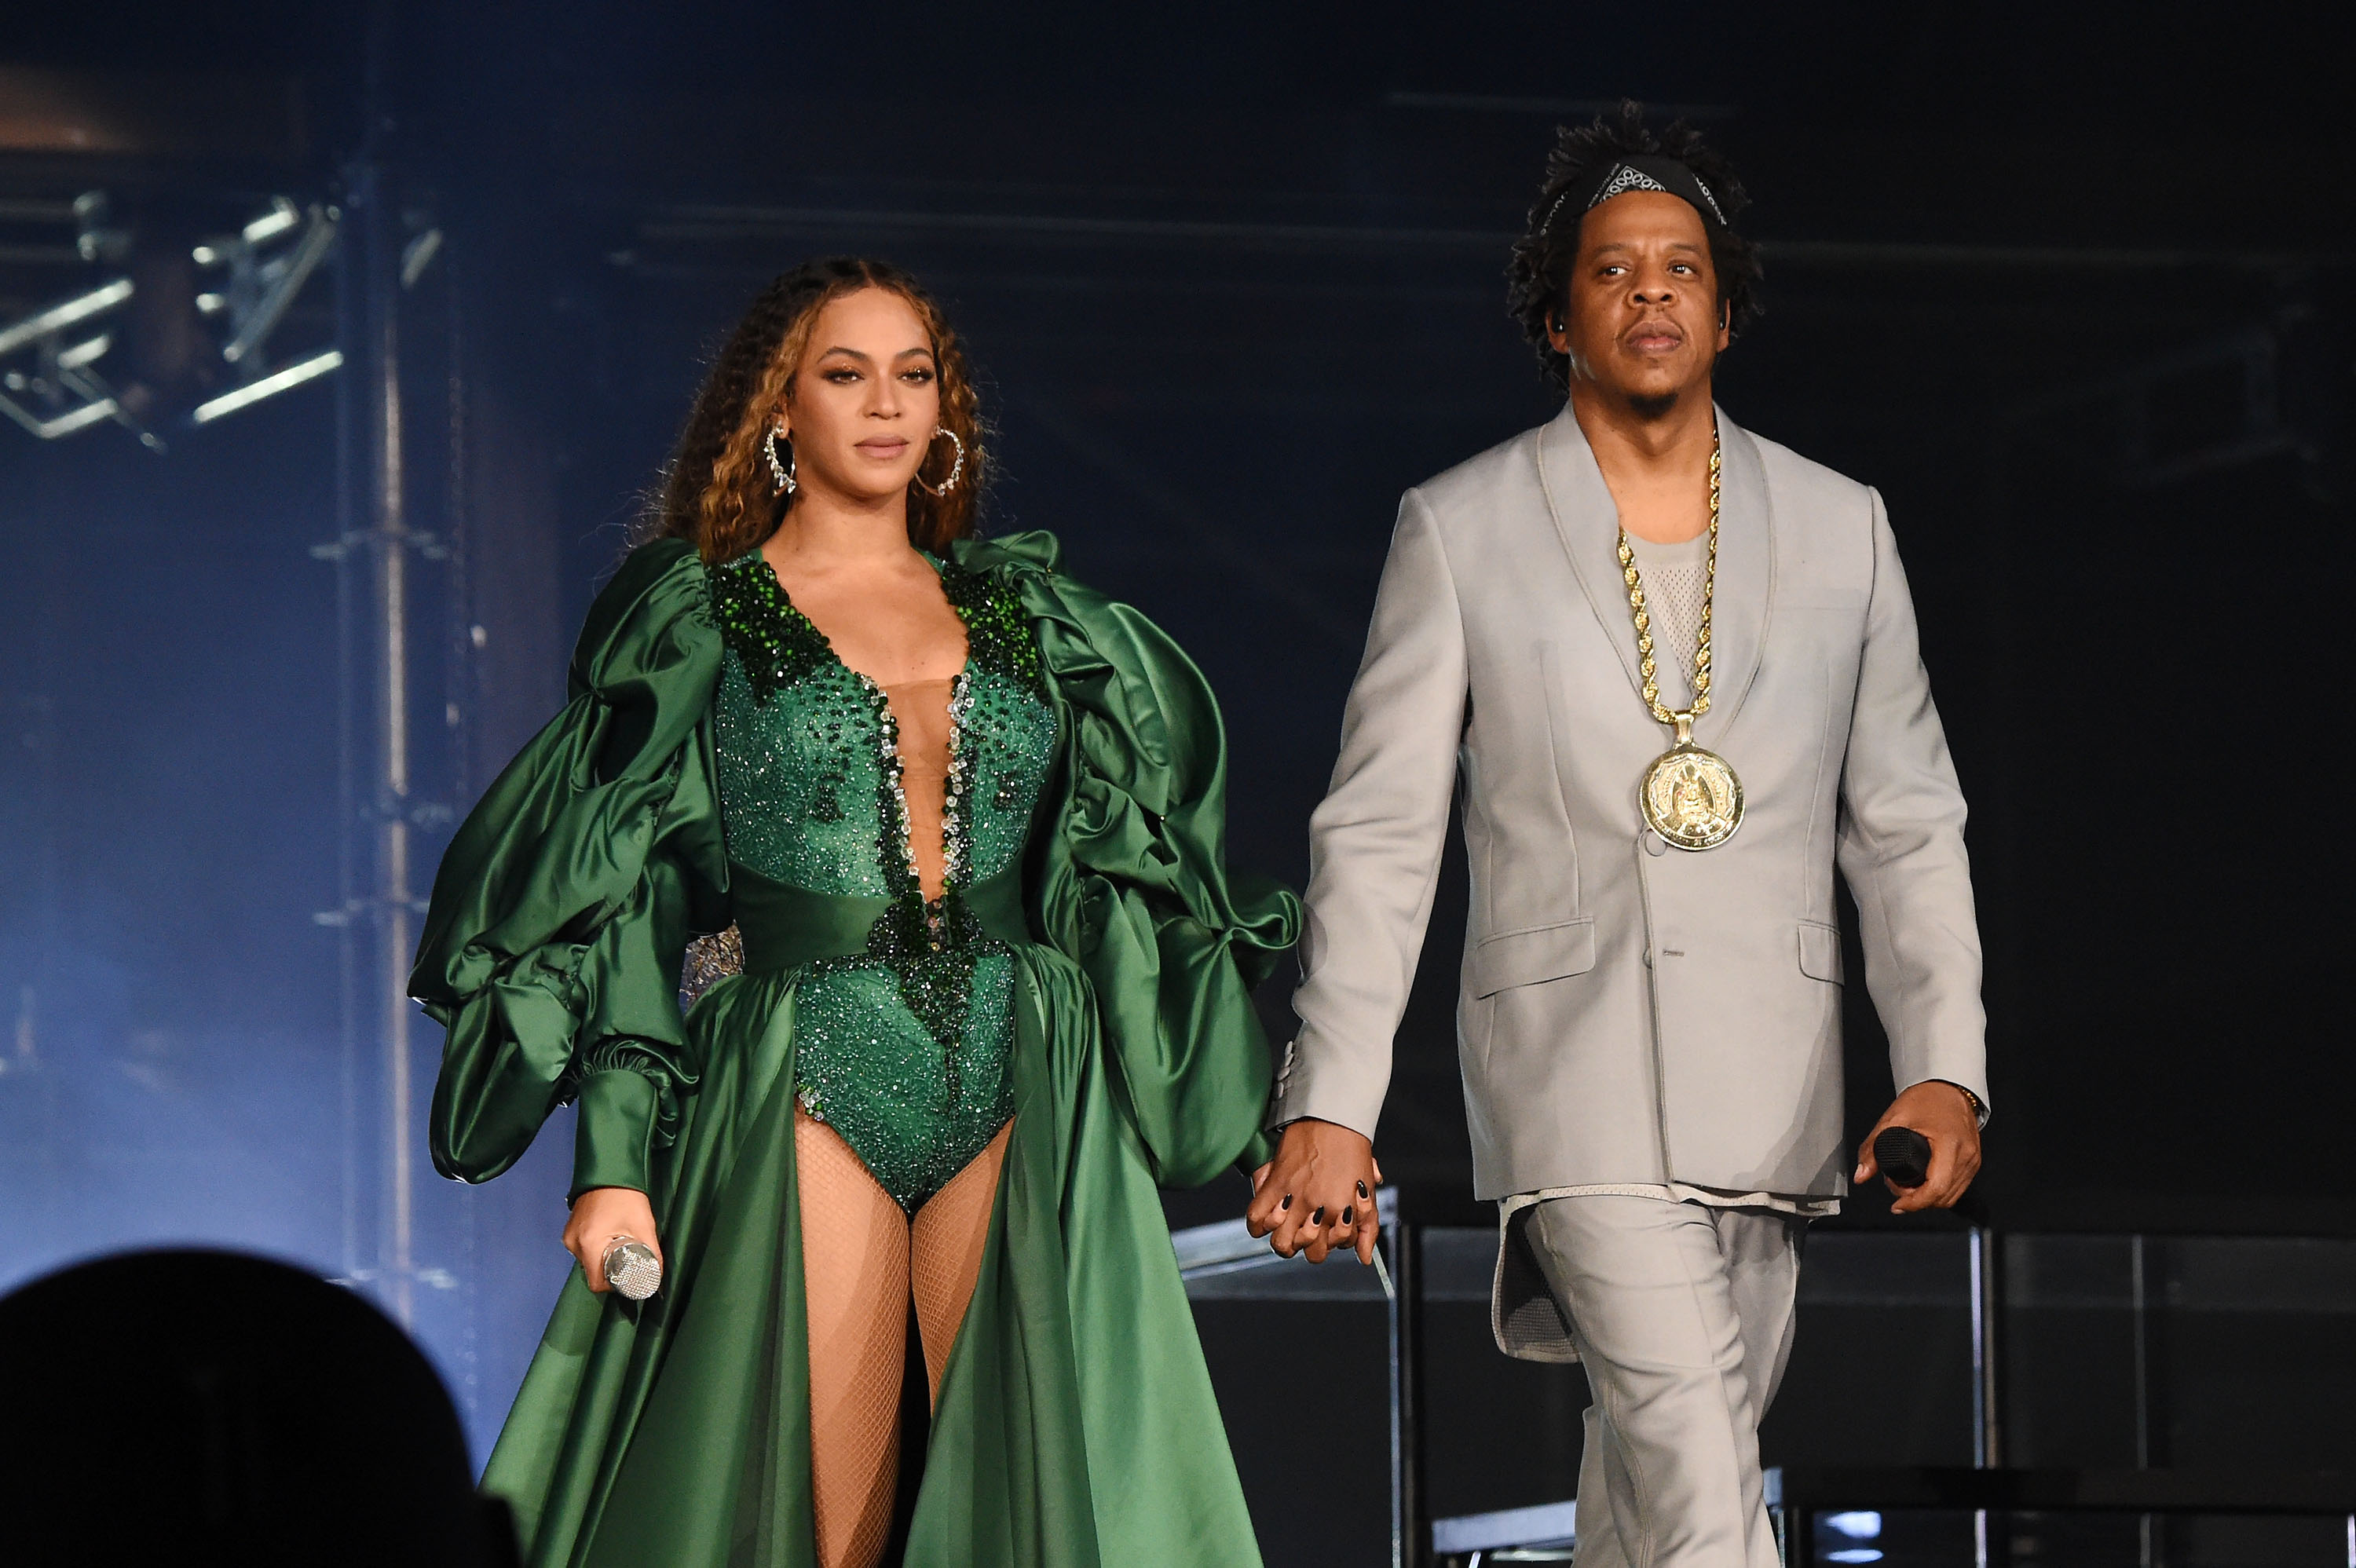 Go Vegan! Beyoncé and Jay-Z launch the challenge to save the world